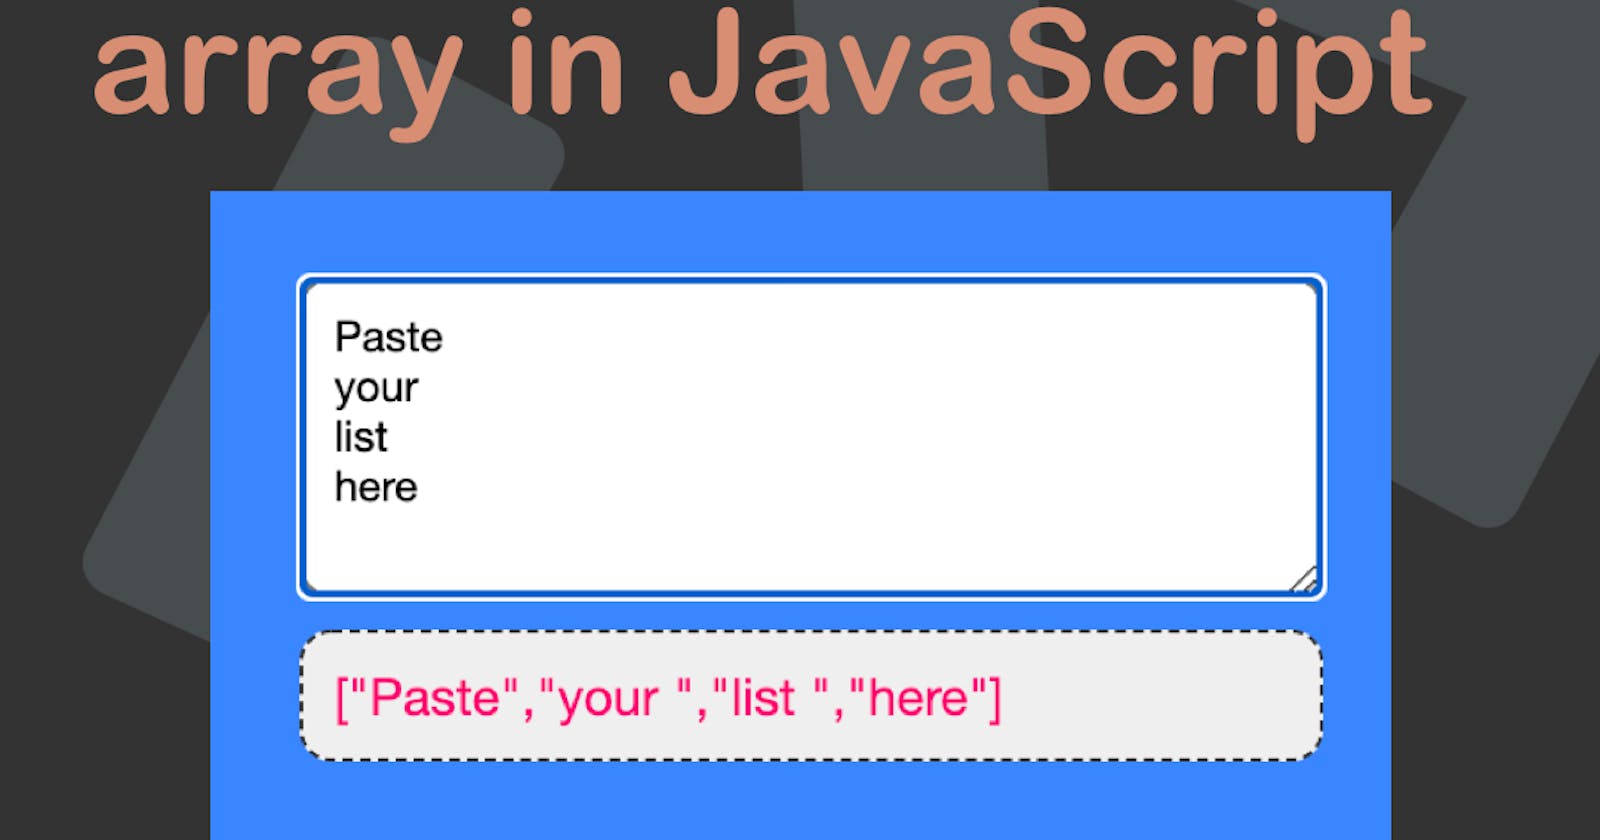 Learn how to convert a list into an array in JavaScript